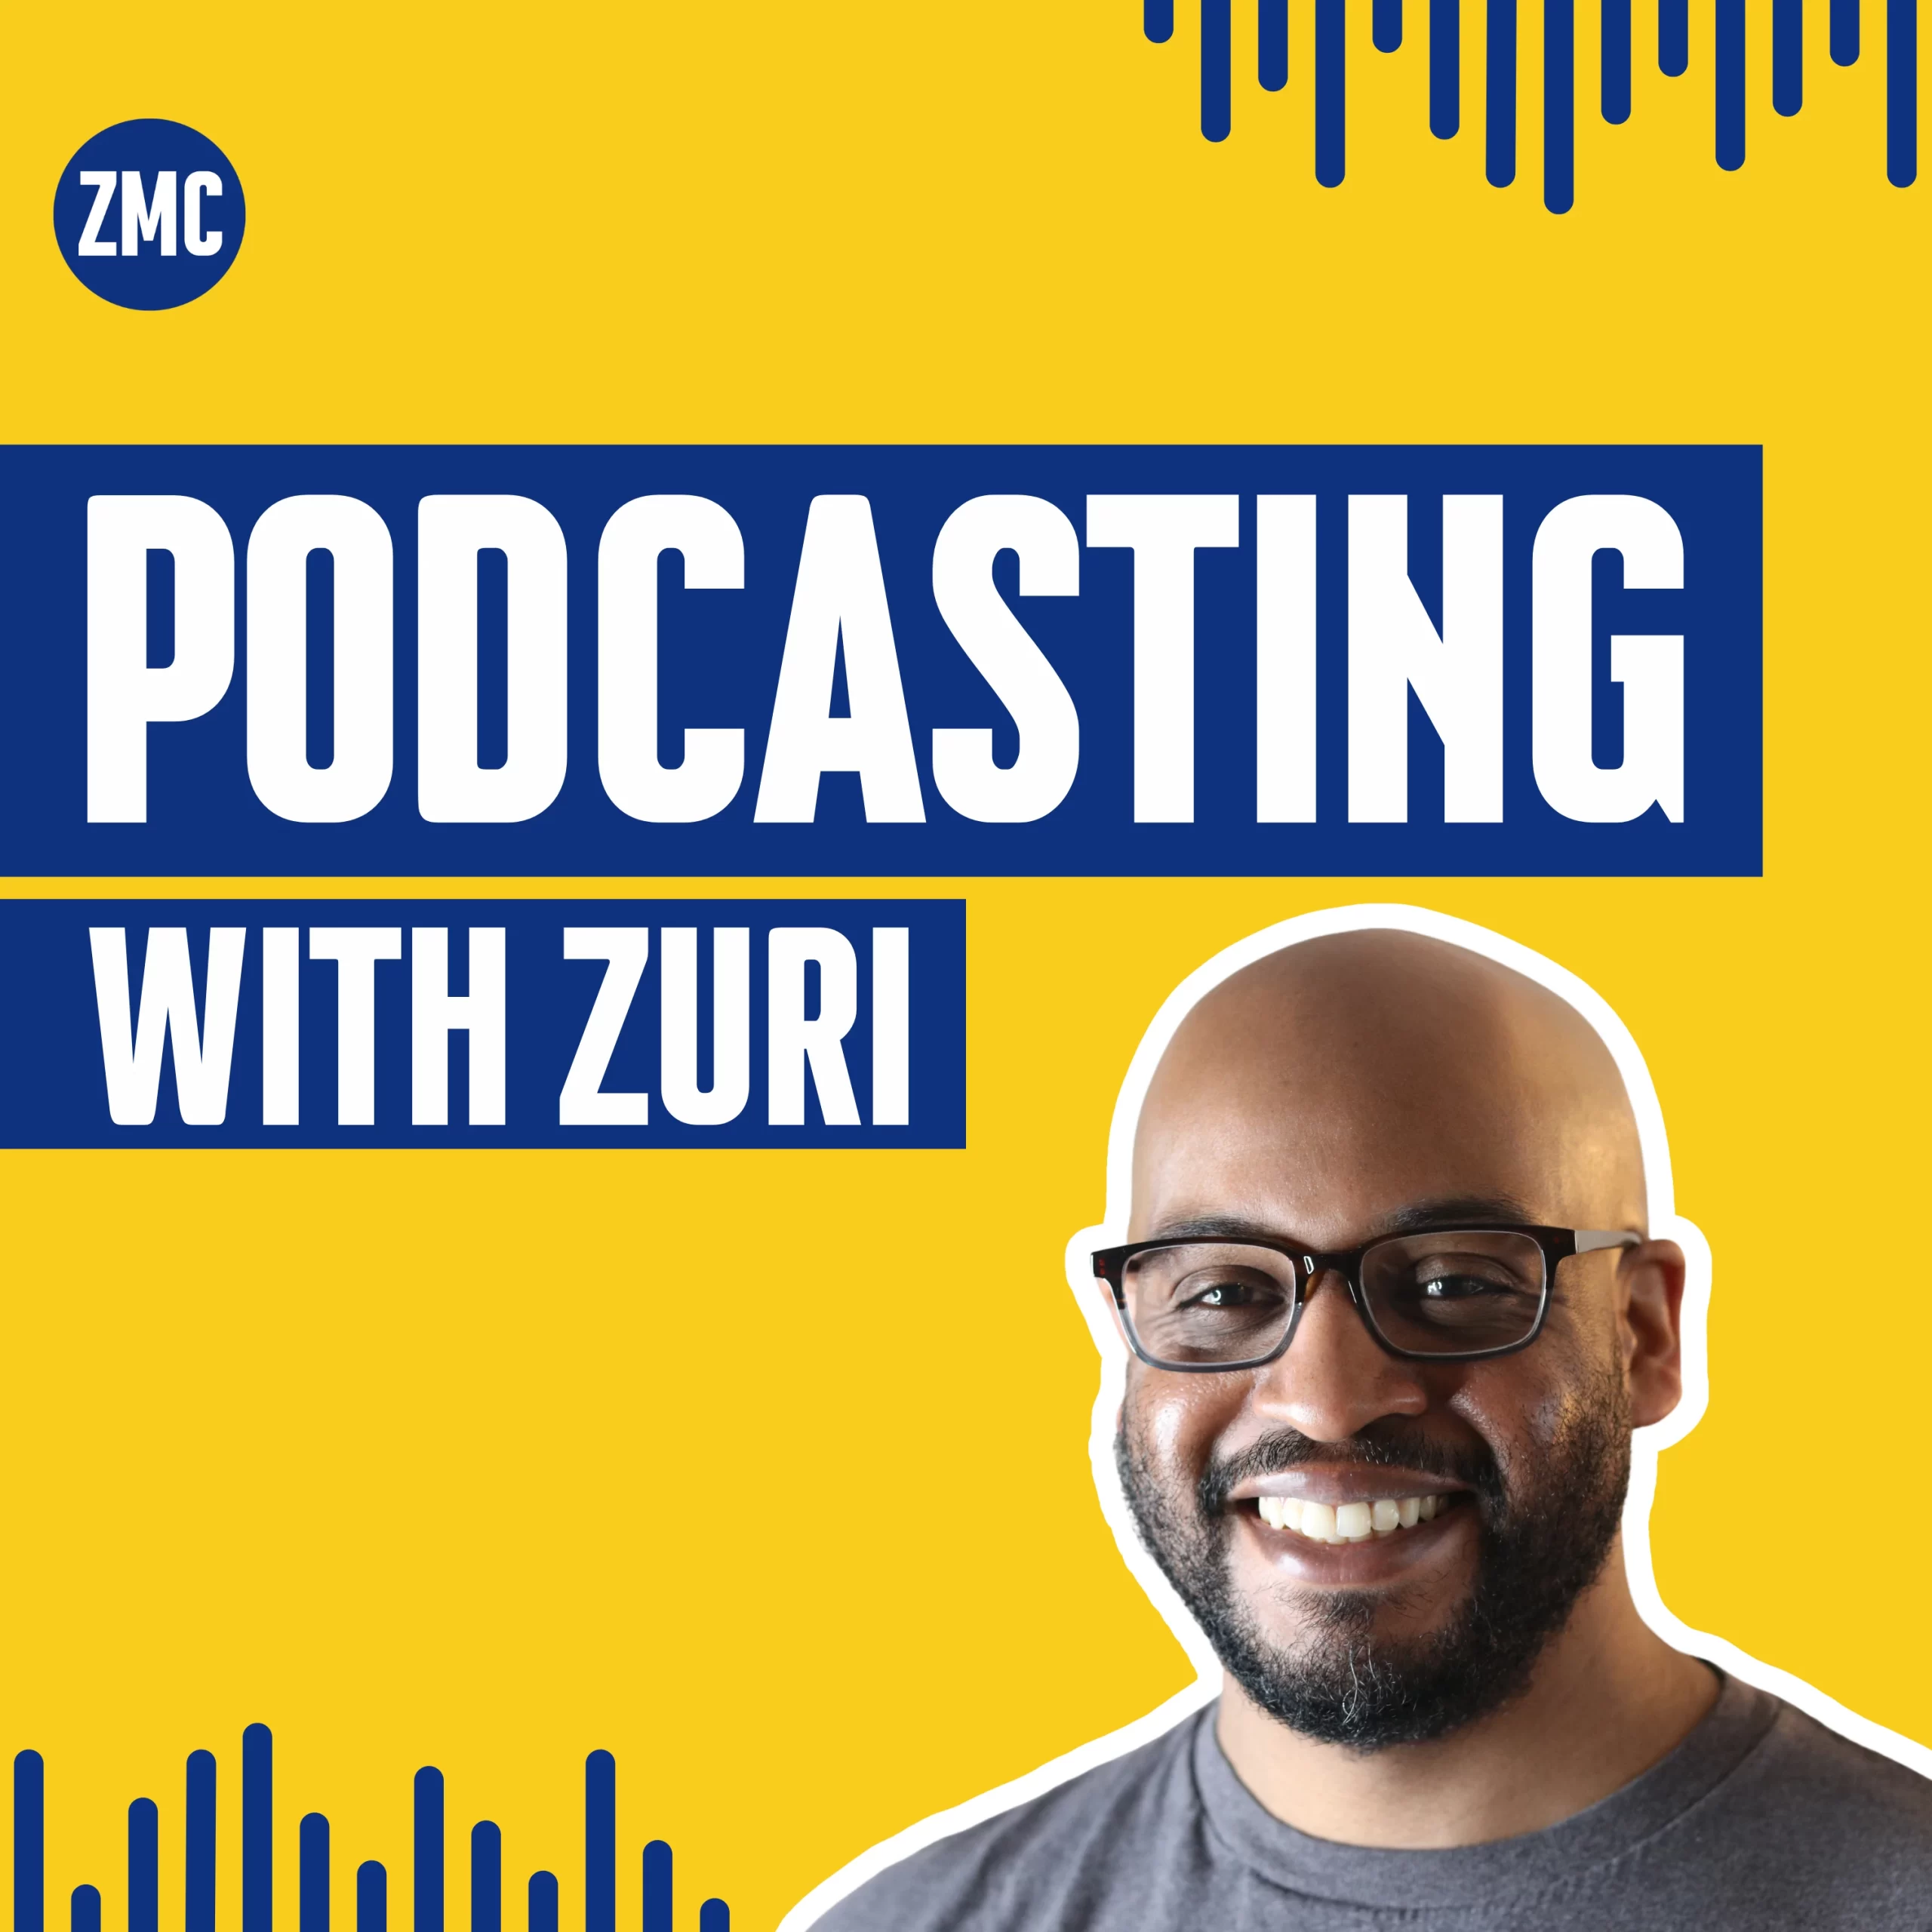 Podcasting with Zuri Berry podcast cover art.